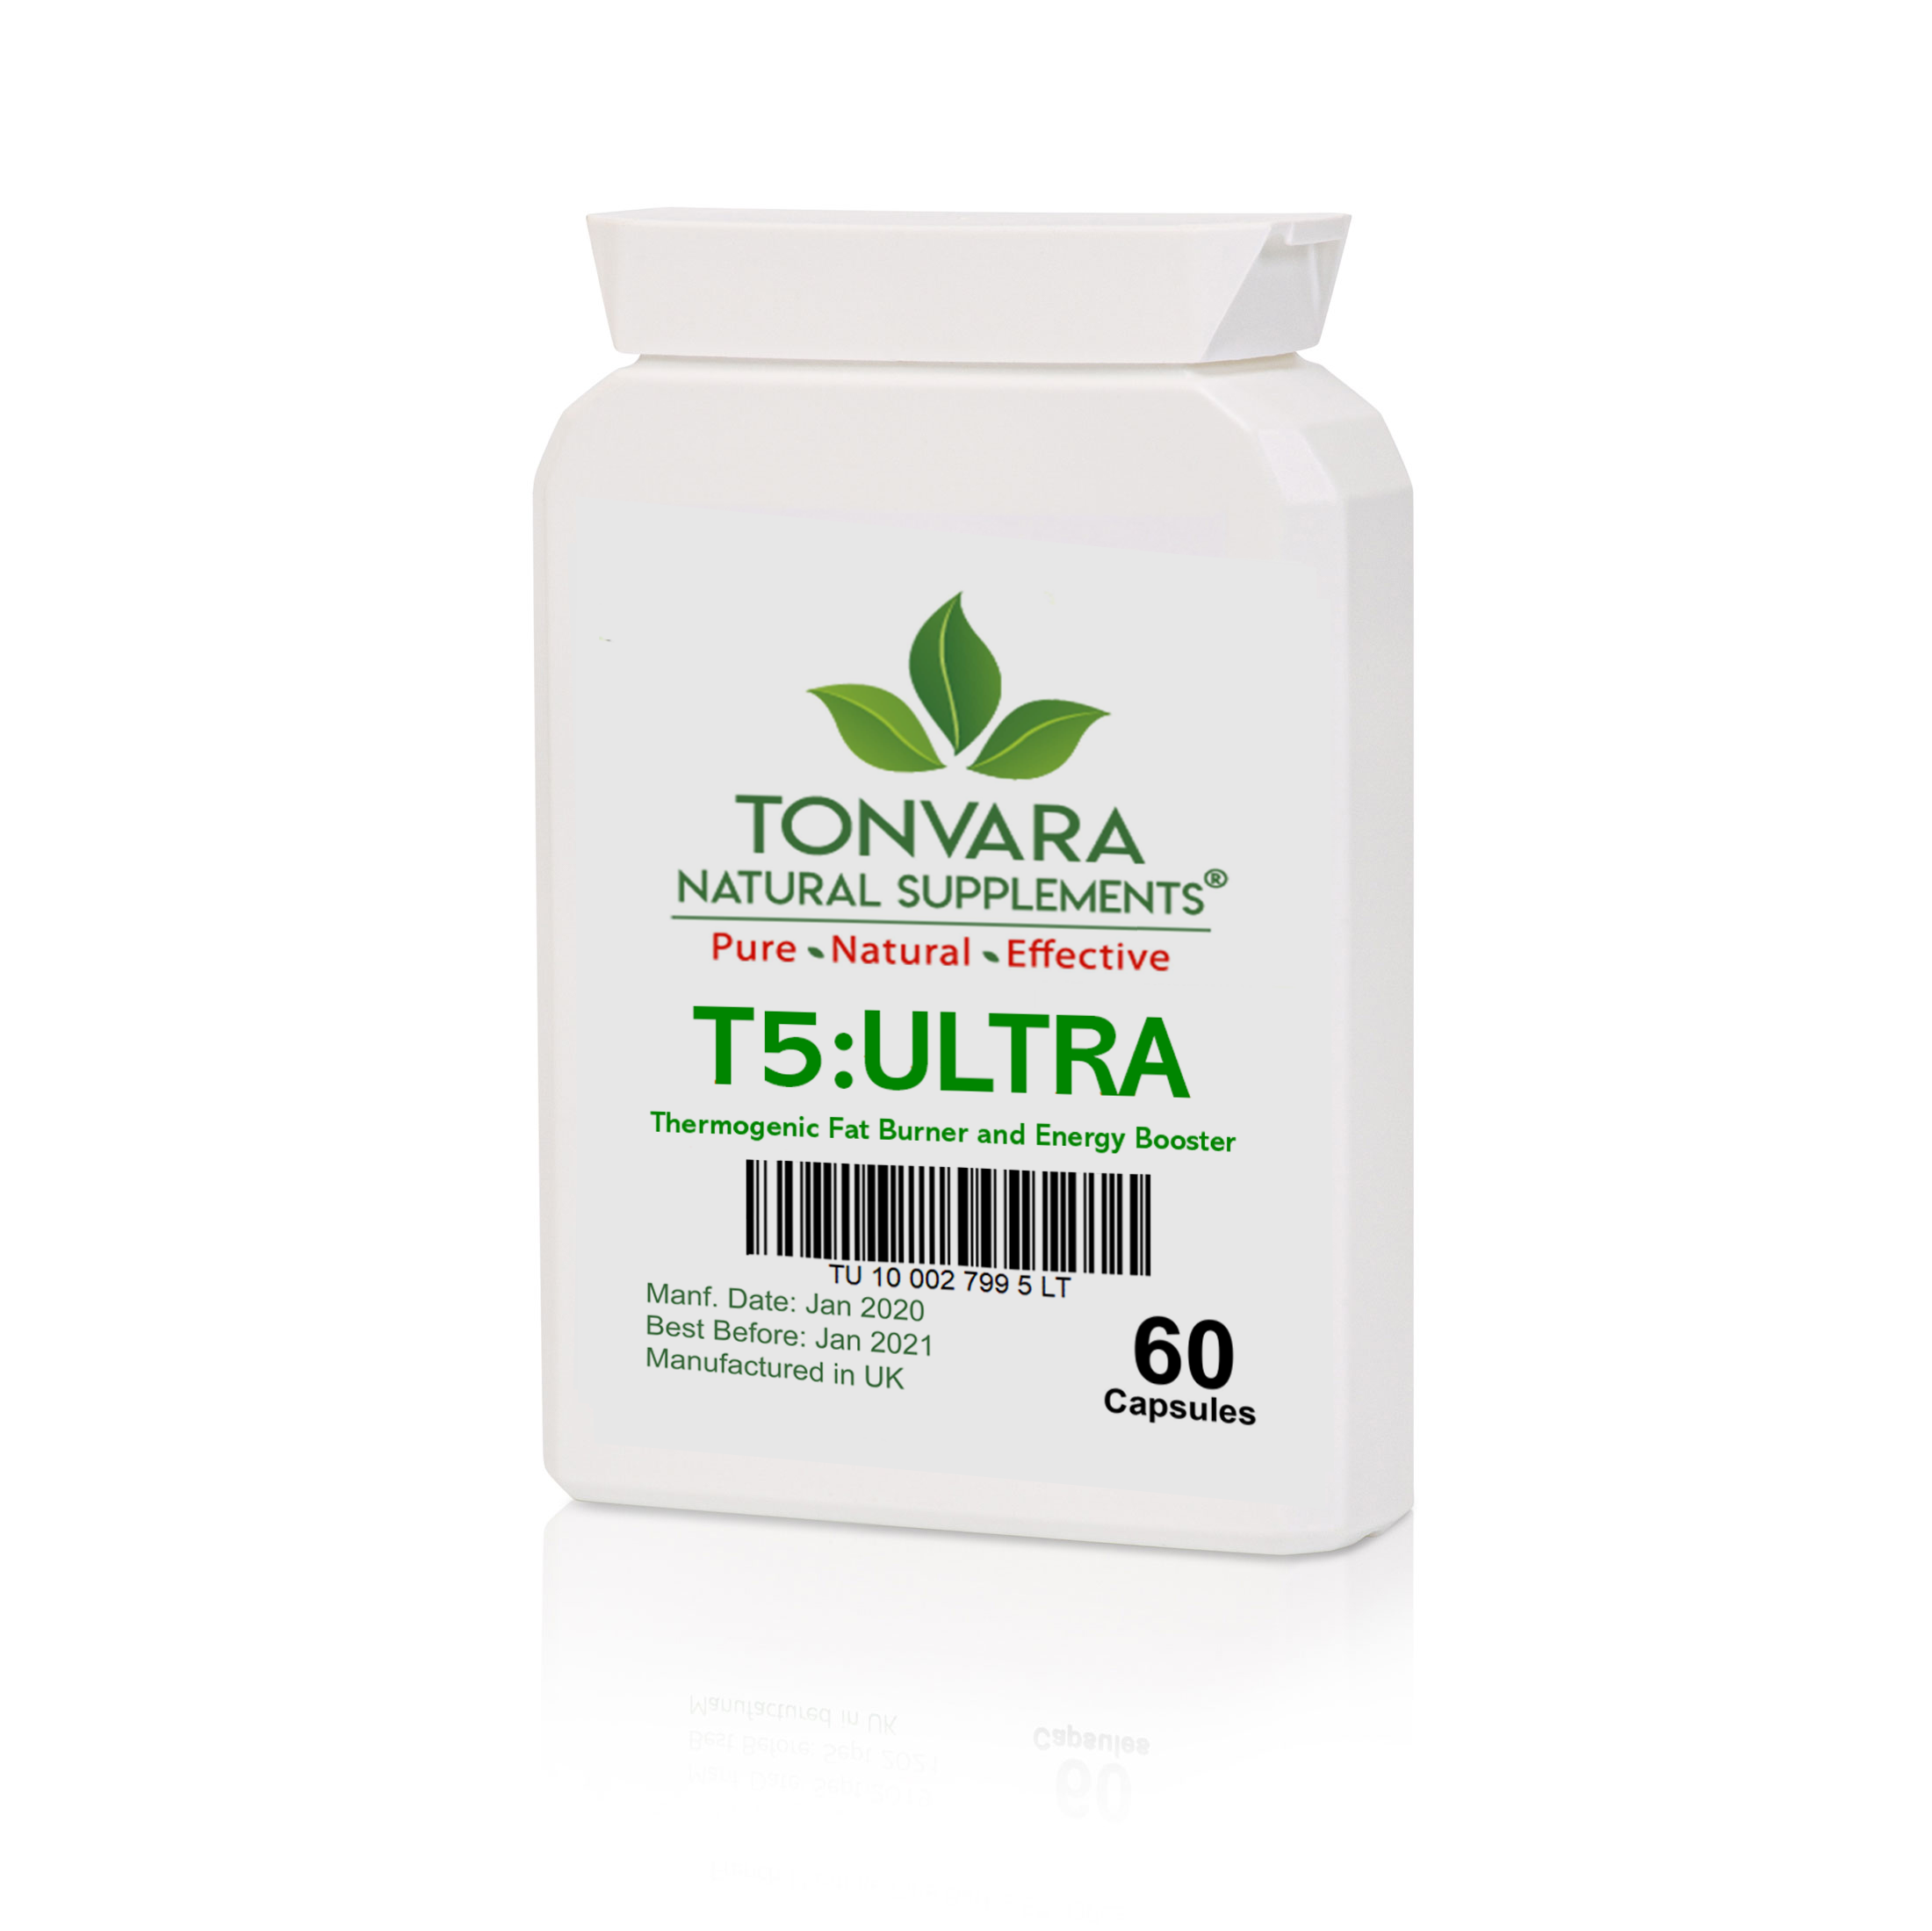 Tonvara T5:ULTRA Thermogenic Fat Burner & Pre-Workout Energy Booster - ULTRA-LOW CLEARANCE PRICES!